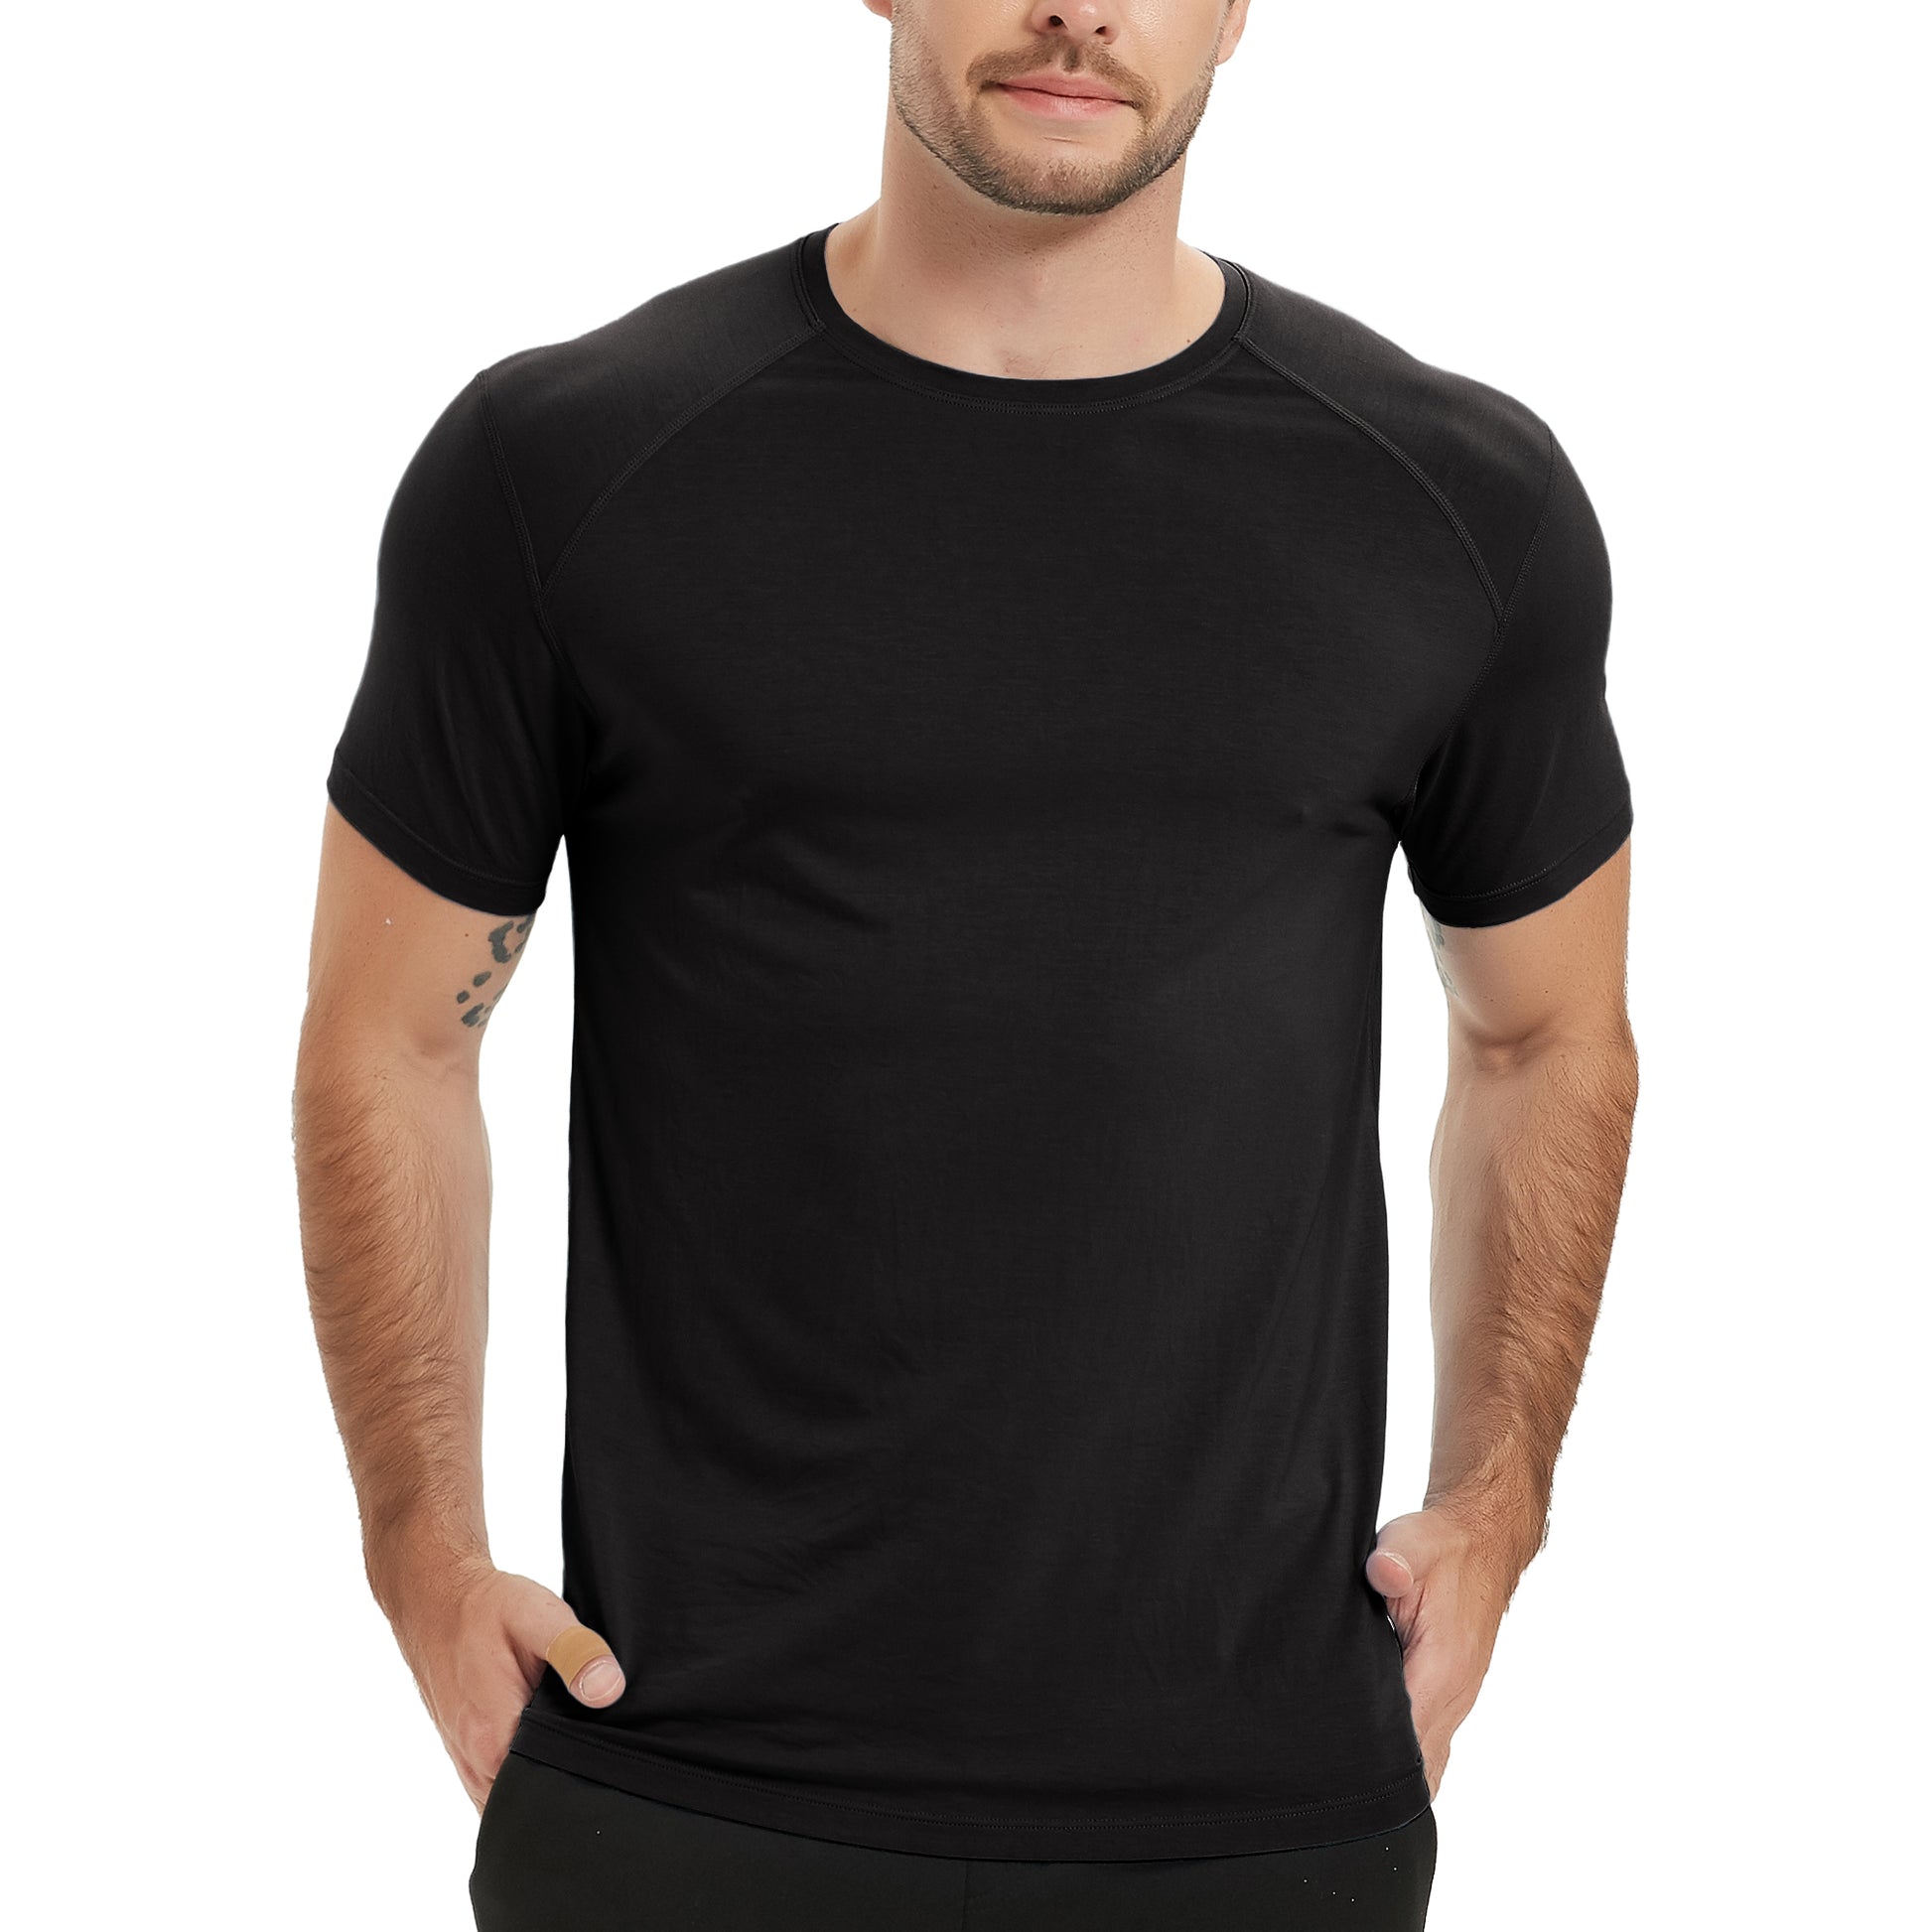 KaLI_store Workout Tops Workout Shirts for Men Short Sleeve Quick